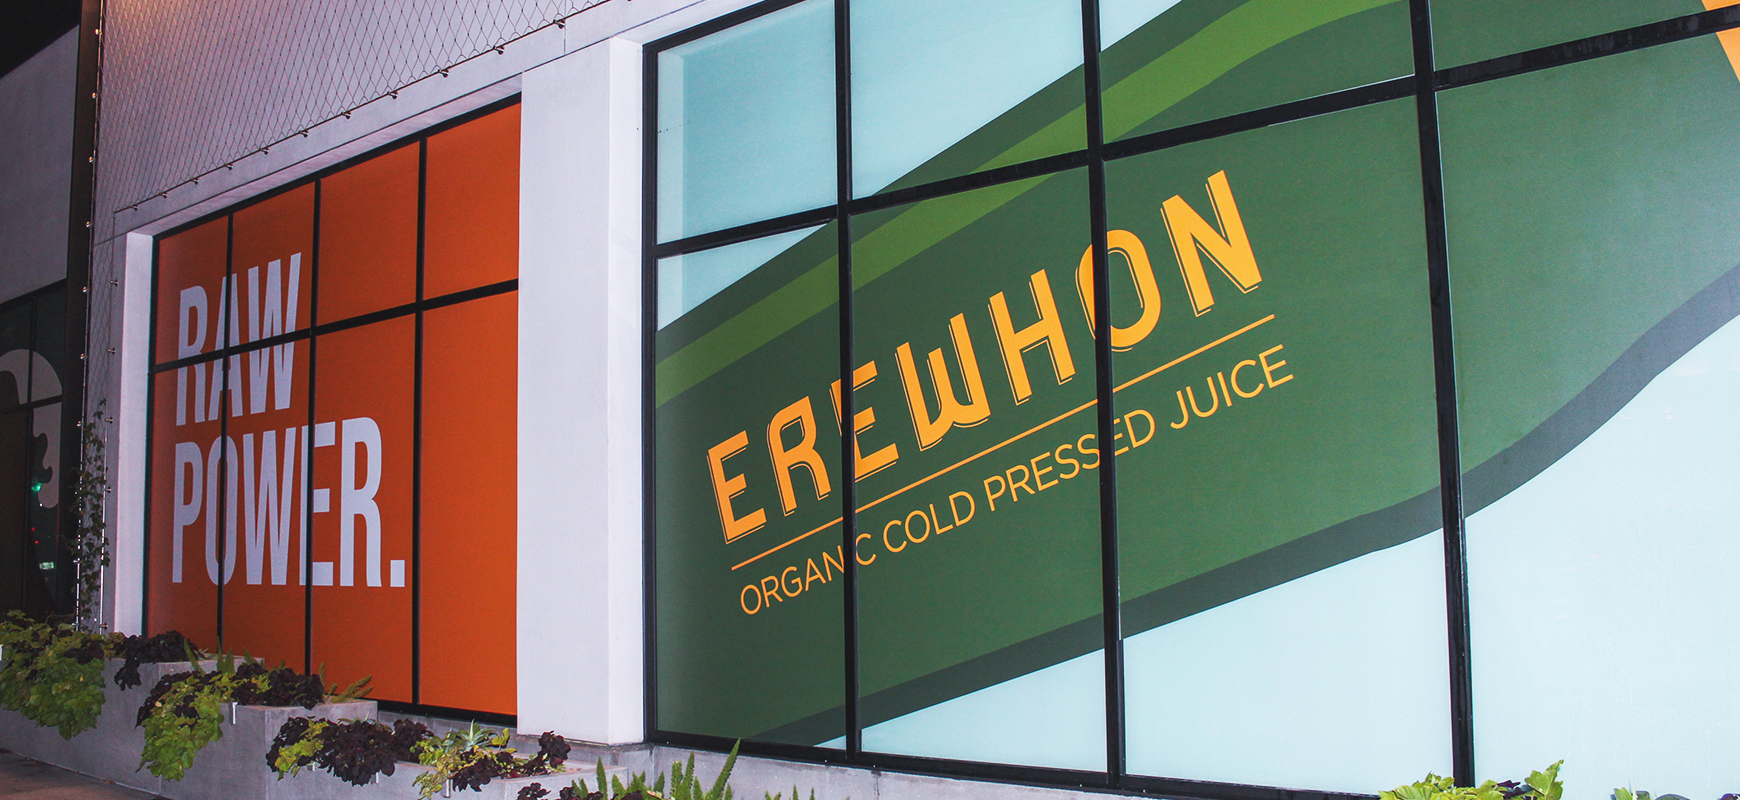 Erewhon window graphics in a large size made of opaque vinyl for storefront branding